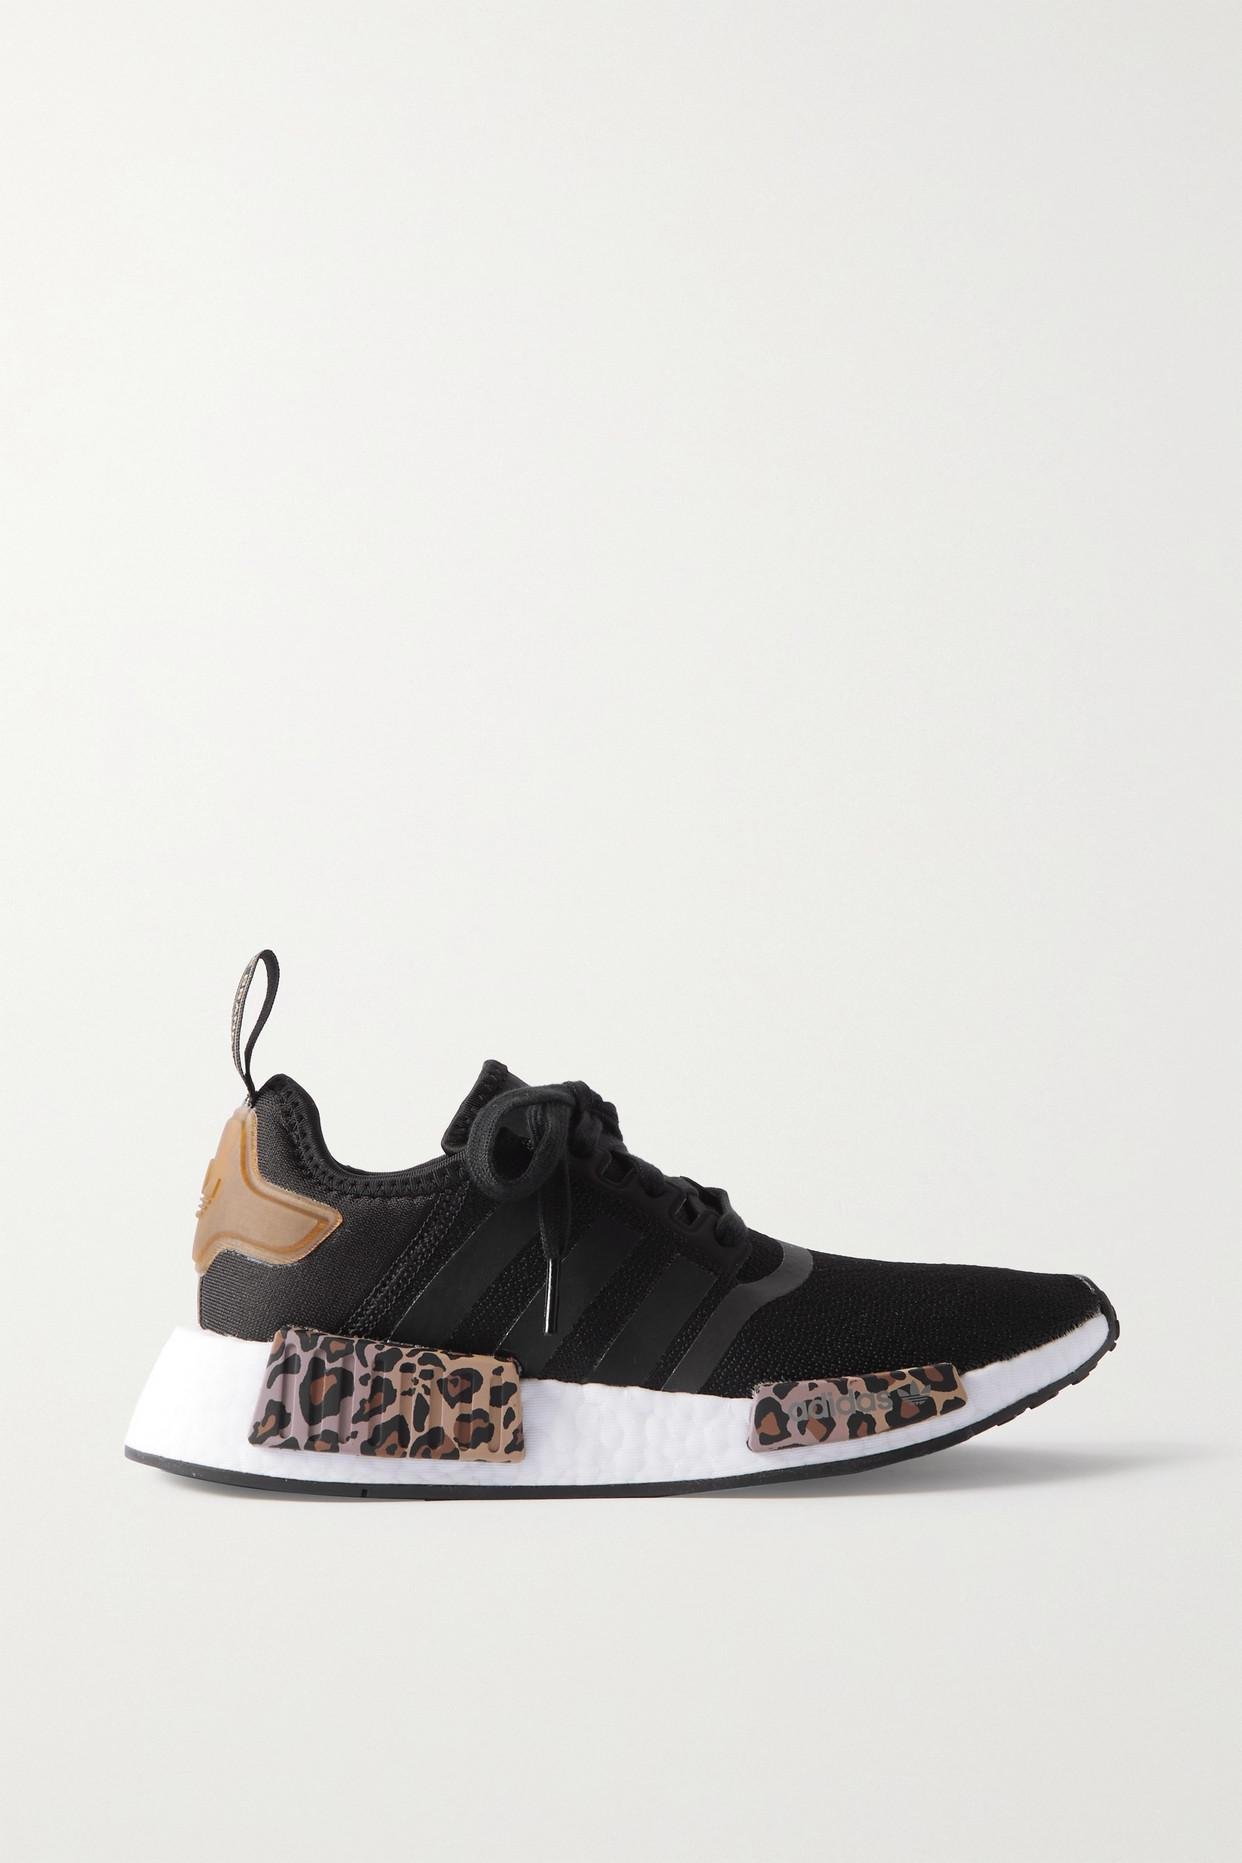 adidas Originals Nmd Leopard-print Rubber-trimmed Sneakers in White | Lyst